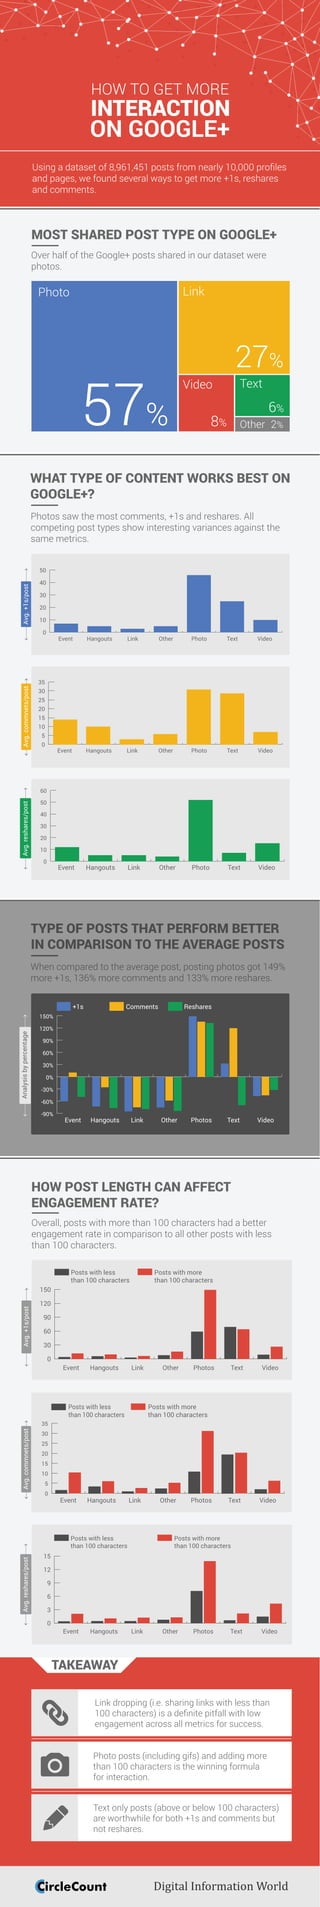 Over half of the Google+ posts shared in our dataset were
photos.
MOST SHARED POST TYPE ON GOOGLE+
Photos saw the most comments, +1s and reshares. All
competing post types show interesting variances against the
same metrics.
WHAT TYPE OF CONTENT WORKS BEST ON
GOOGLE+?
Photo
57%
Link
27%
Video
8%
Text
6%
Other 2%
Avg.commnets/post
0
5
10
15
20
25
30
35
VideoTextPhotoOtherLinkHangoutsEvent
0
10
20
30
40
50
VideoTextPhotoOtherLinkHangoutsEvent
Avg.+1s/postAvg.reshares/post
0
10
20
30
40
50
60
VideoTextPhotoOtherLinkHangoutsEvent
When compared to the average post, posting photos got 149%
more +1s, 136% more comments and 133% more reshares.
TYPE OF POSTS THAT PERFORM BETTER
IN COMPARISON TO THE AVERAGE POSTS
Overall, posts with more than 100 characters had a better
engagement rate in comparison to all other posts with less
than 100 characters.
HOW POST LENGTH CAN AFFECT
ENGAGEMENT RATE?
0
5
10
15
20
25
30
35
Posts with more
than 100 characters
Posts with less
than 100 characters
VideoTextPhotosOtherLinkHangoutsEvent
Avg.commnets/post
-90%
-60%
-30%
0%
30%
60%
90%
120%
150%
ResharesComments+1s
VideoTextPhotosOtherLinkHangoutsEvent
AnalysisbypercentageAvg.+1s/post
0
30
60
90
120
150
Posts with more
than 100 characters
Posts with less
than 100 characters
VideoTextPhotosOtherLinkHangoutsEvent
Avg.reshares/post
0
3
6
9
12
15
Posts with more
than 100 characters
Posts with less
than 100 characters
VideoTextPhotosOtherLinkHangoutsEvent
Link dropping (i.e. sharing links with less than
100 characters) is a deﬁnite pitfall with low
engagement across all metrics for success.
Photo posts (including gifs) and adding more
than 100 characters is the winning formula
for interaction.
TAKEAWAY
Text only posts (above or below 100 characters)
are worthwhile for both +1s and comments but
not reshares.
HOW TO GET MORE
ON GOOGLE+
INTERACTION
Using a dataset of 8,961,451 posts from nearly 10,000 proﬁles
and pages, we found several ways to get more +1s, reshares
and comments.
 